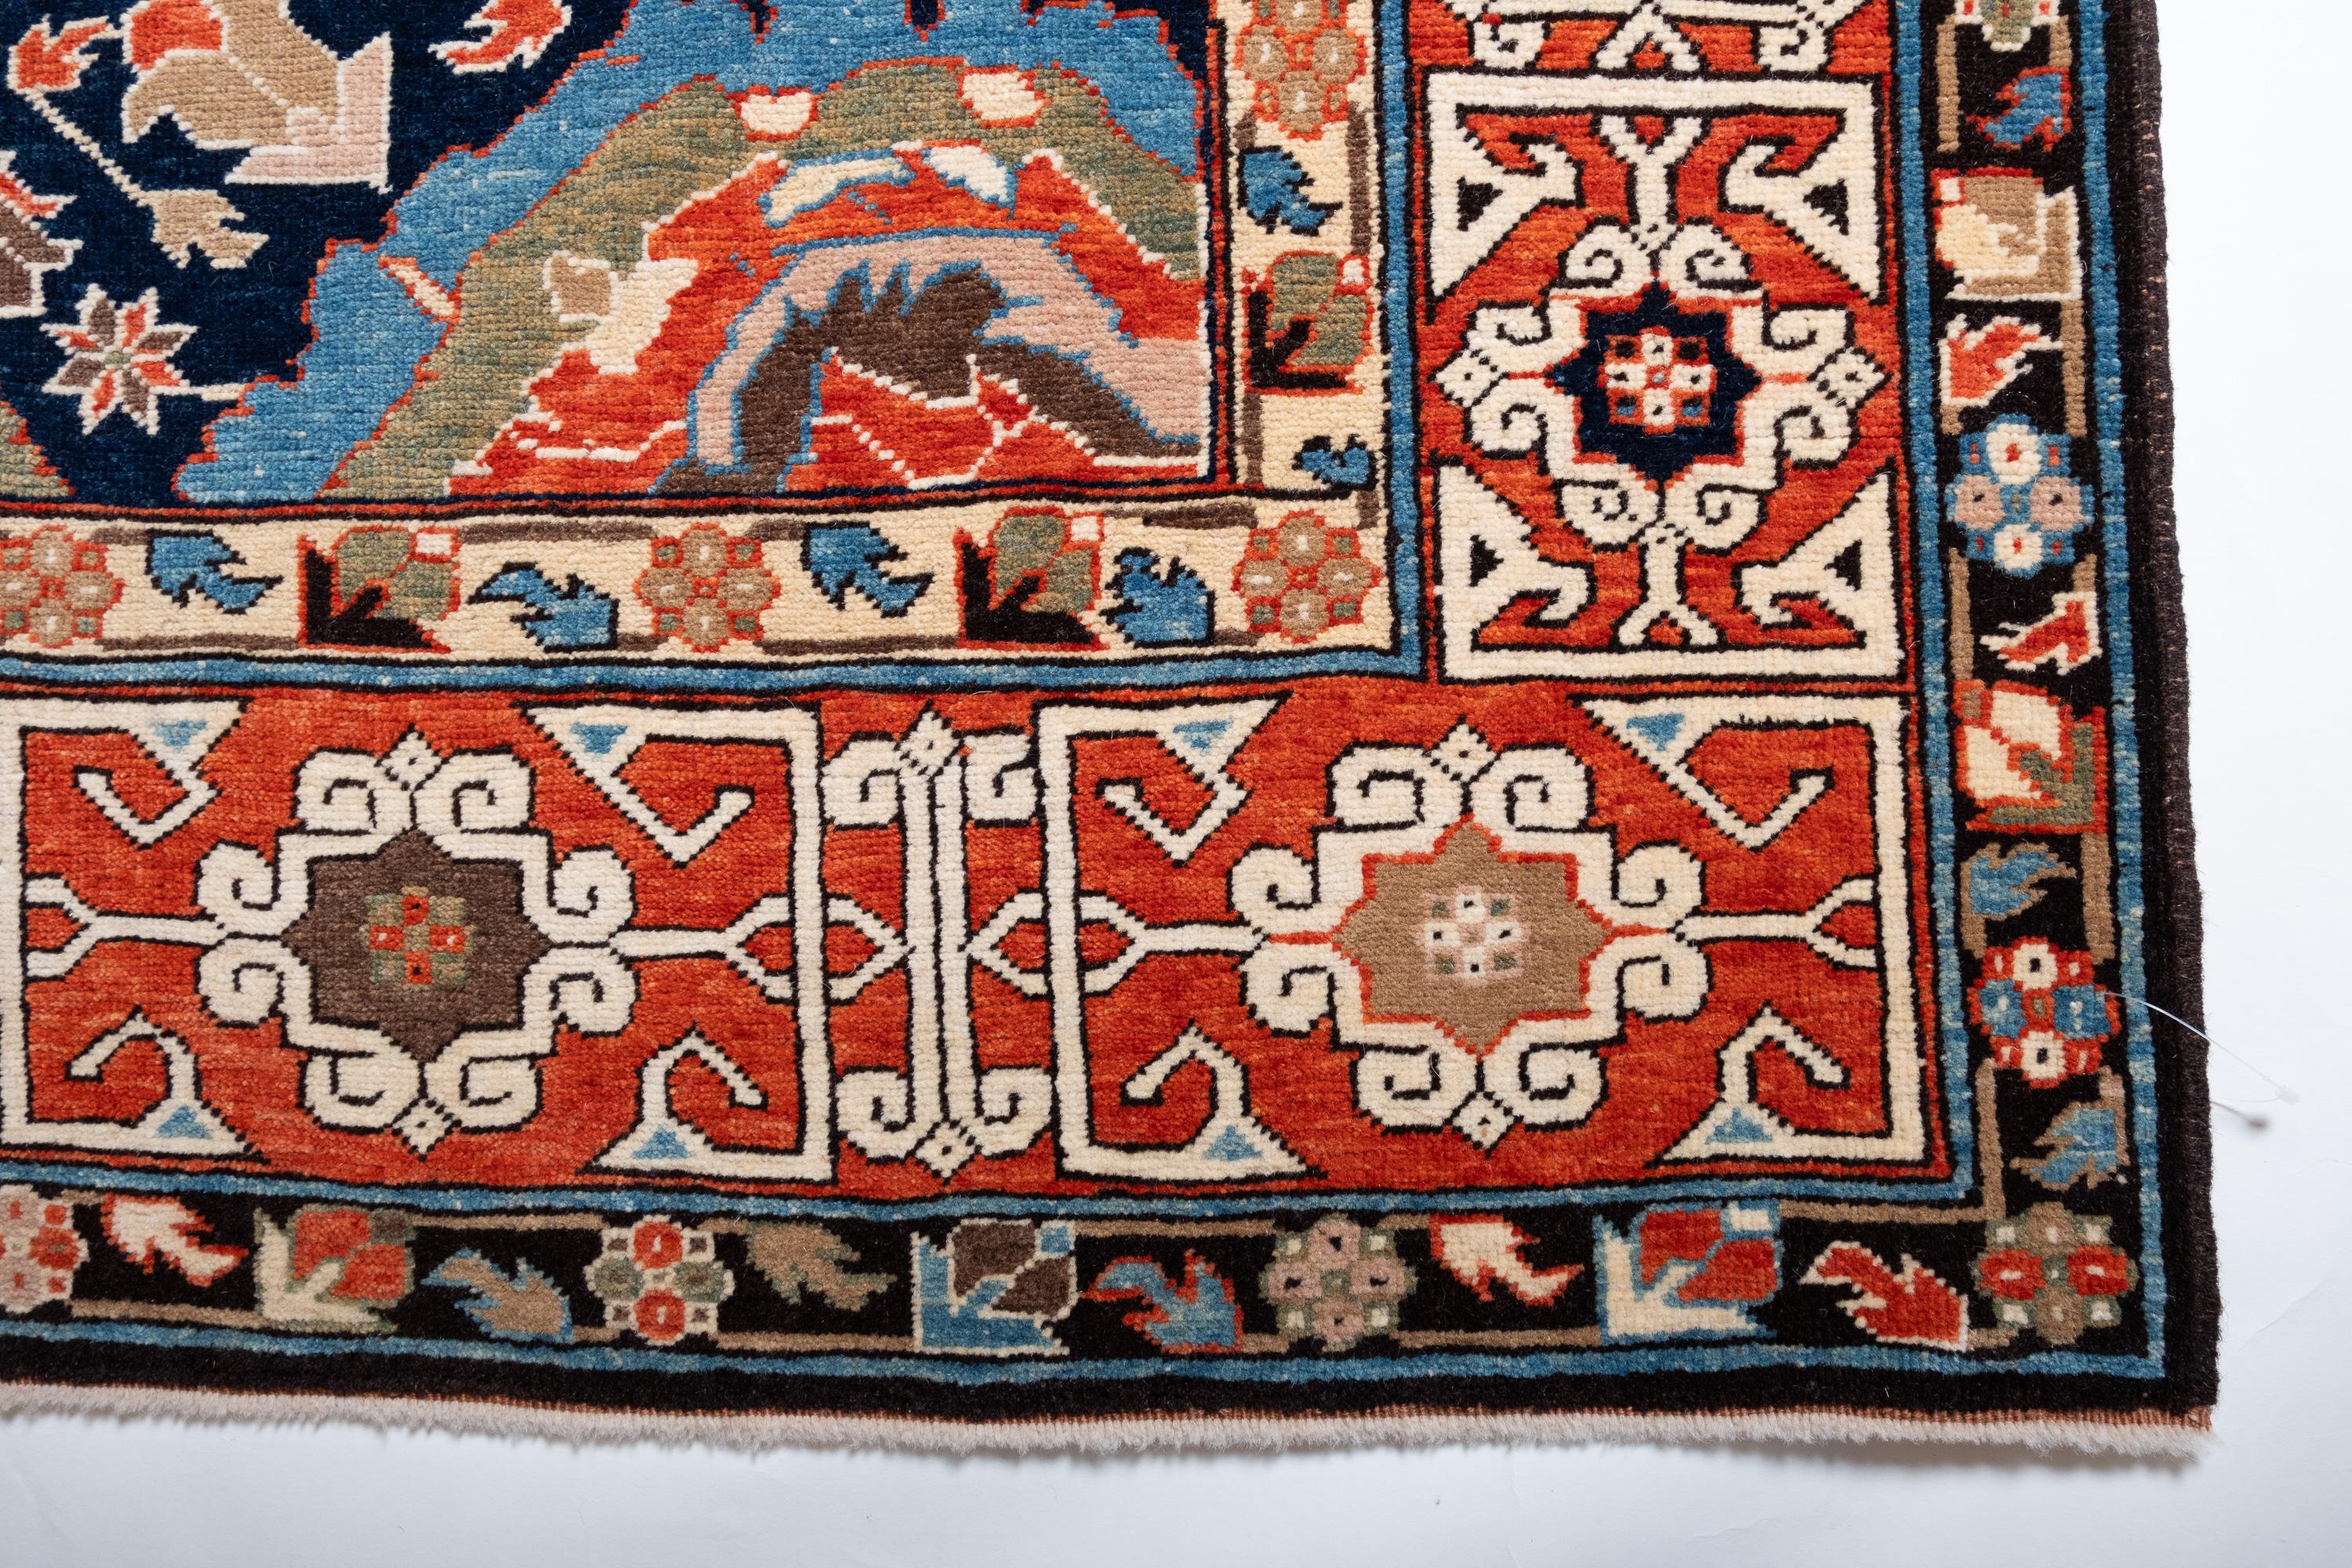 Vegetable Dyed Ararat Rugs Harshang Design with Kufic Border Rug Revival Carpet, Natural Dyed For Sale